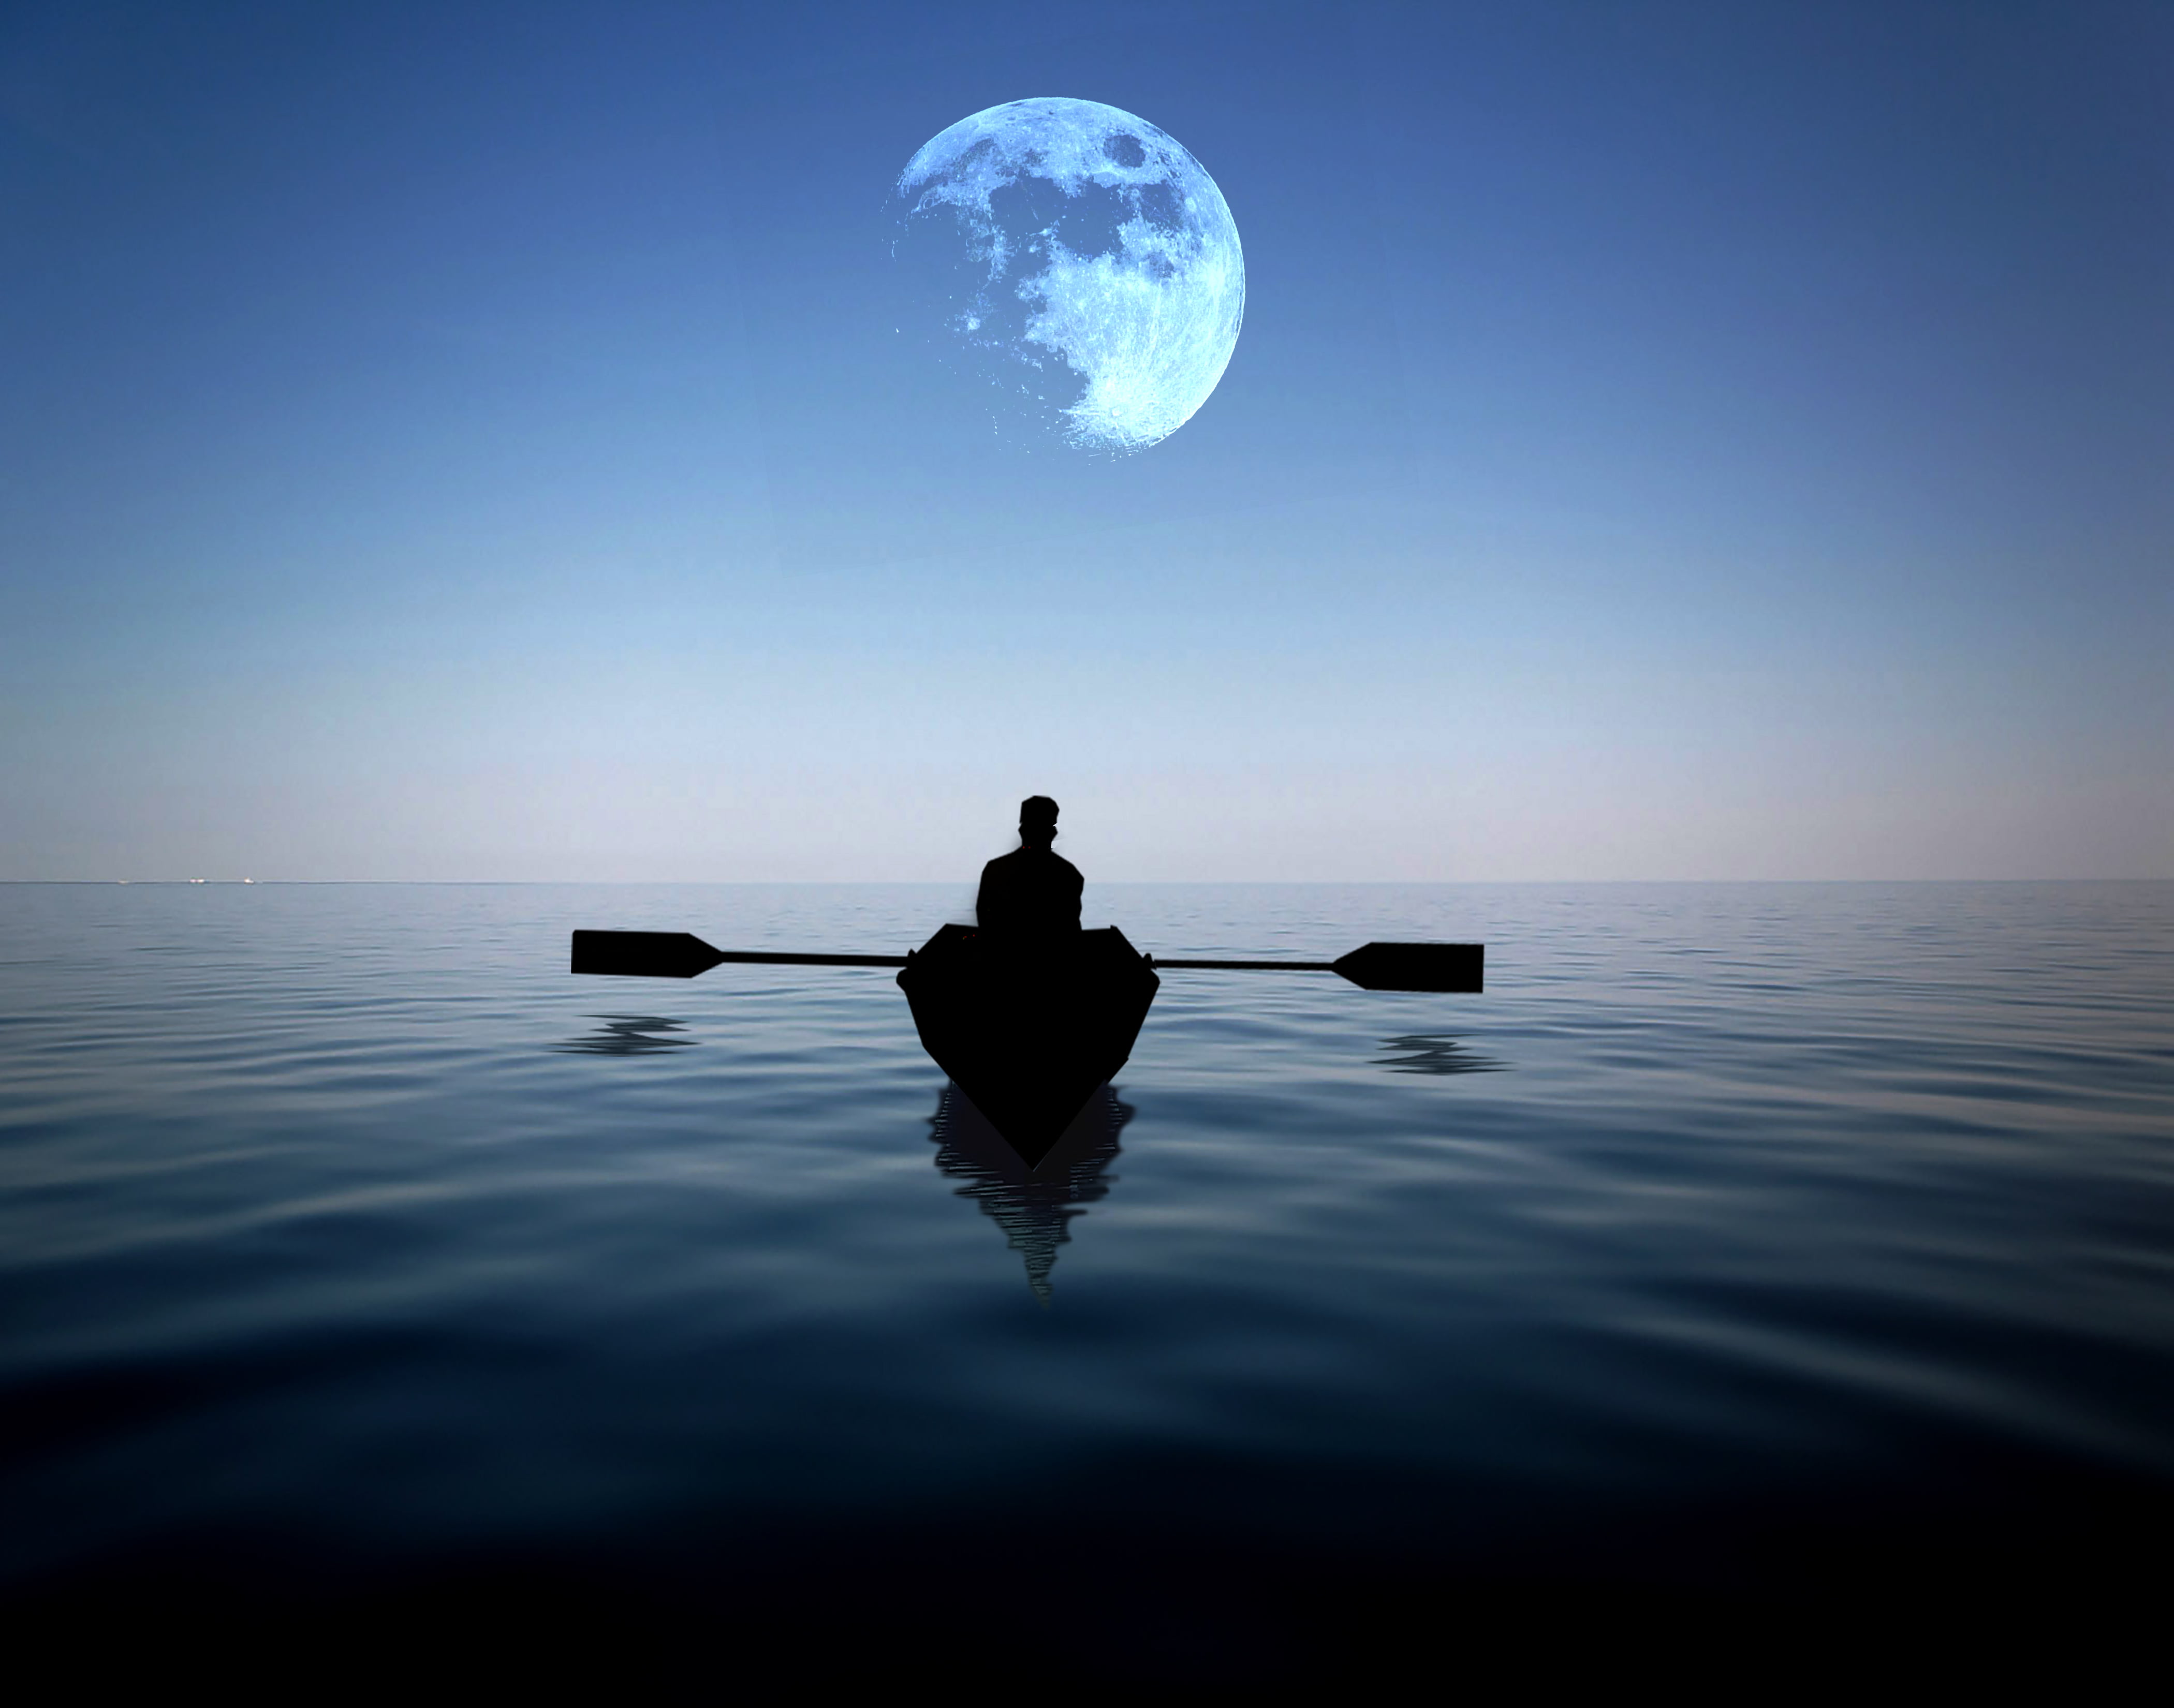 Man Riding On A Boat Alone In The Sea With Moon Hovering Above At